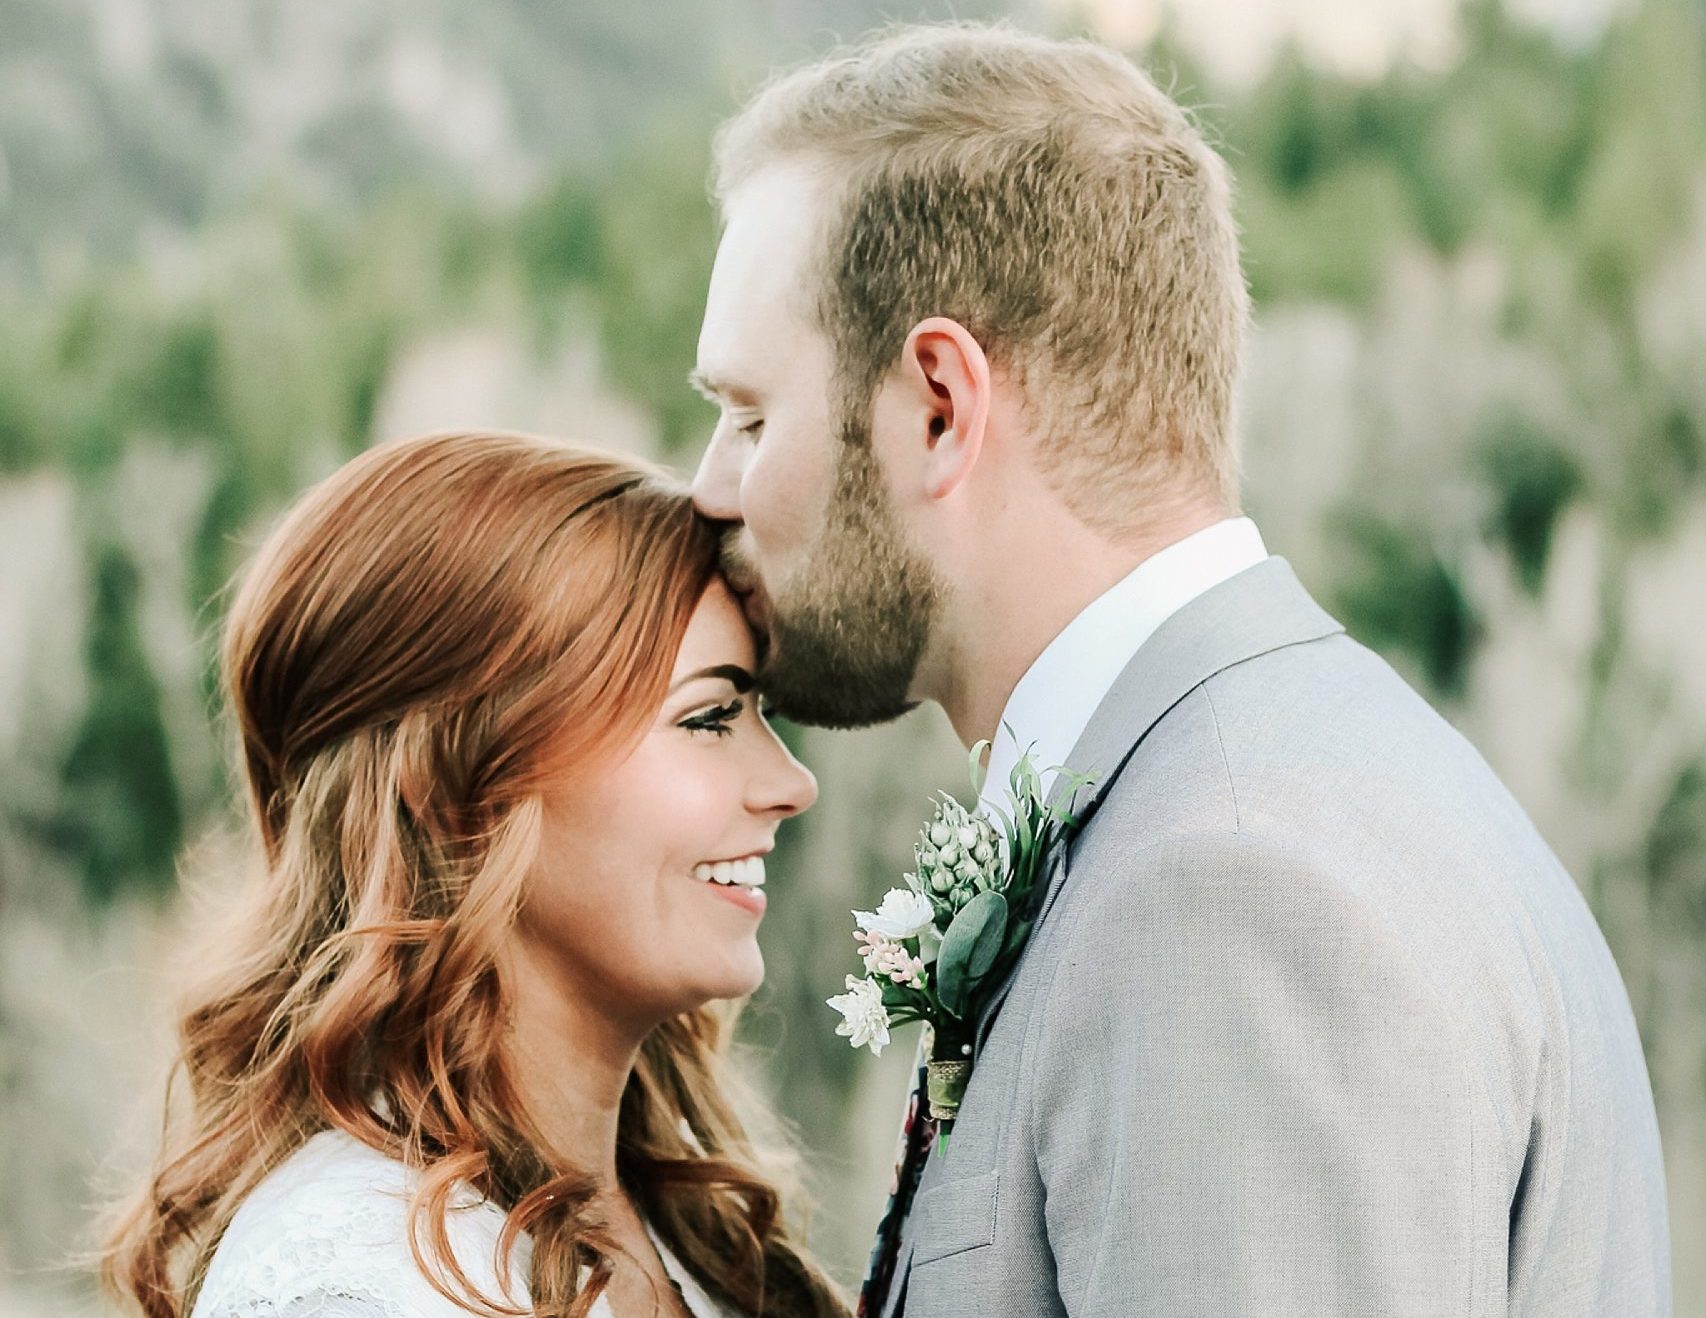 bride and groom for their wedding at le jardin utah by adrian wayment photo